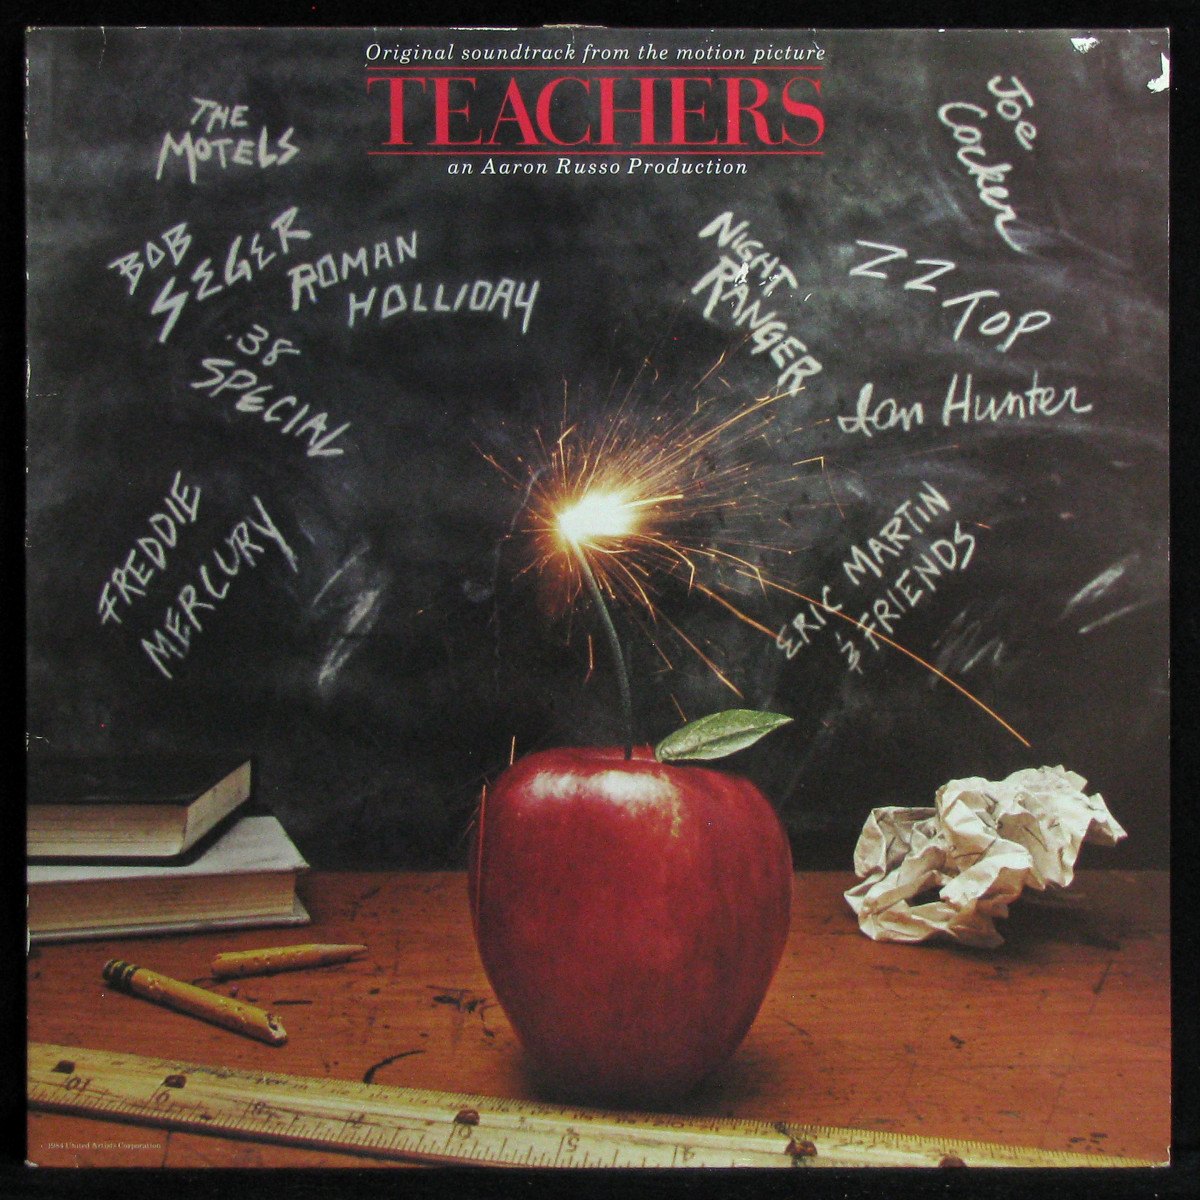 Original Soundtrack From The Motion Picture 'Teachers'